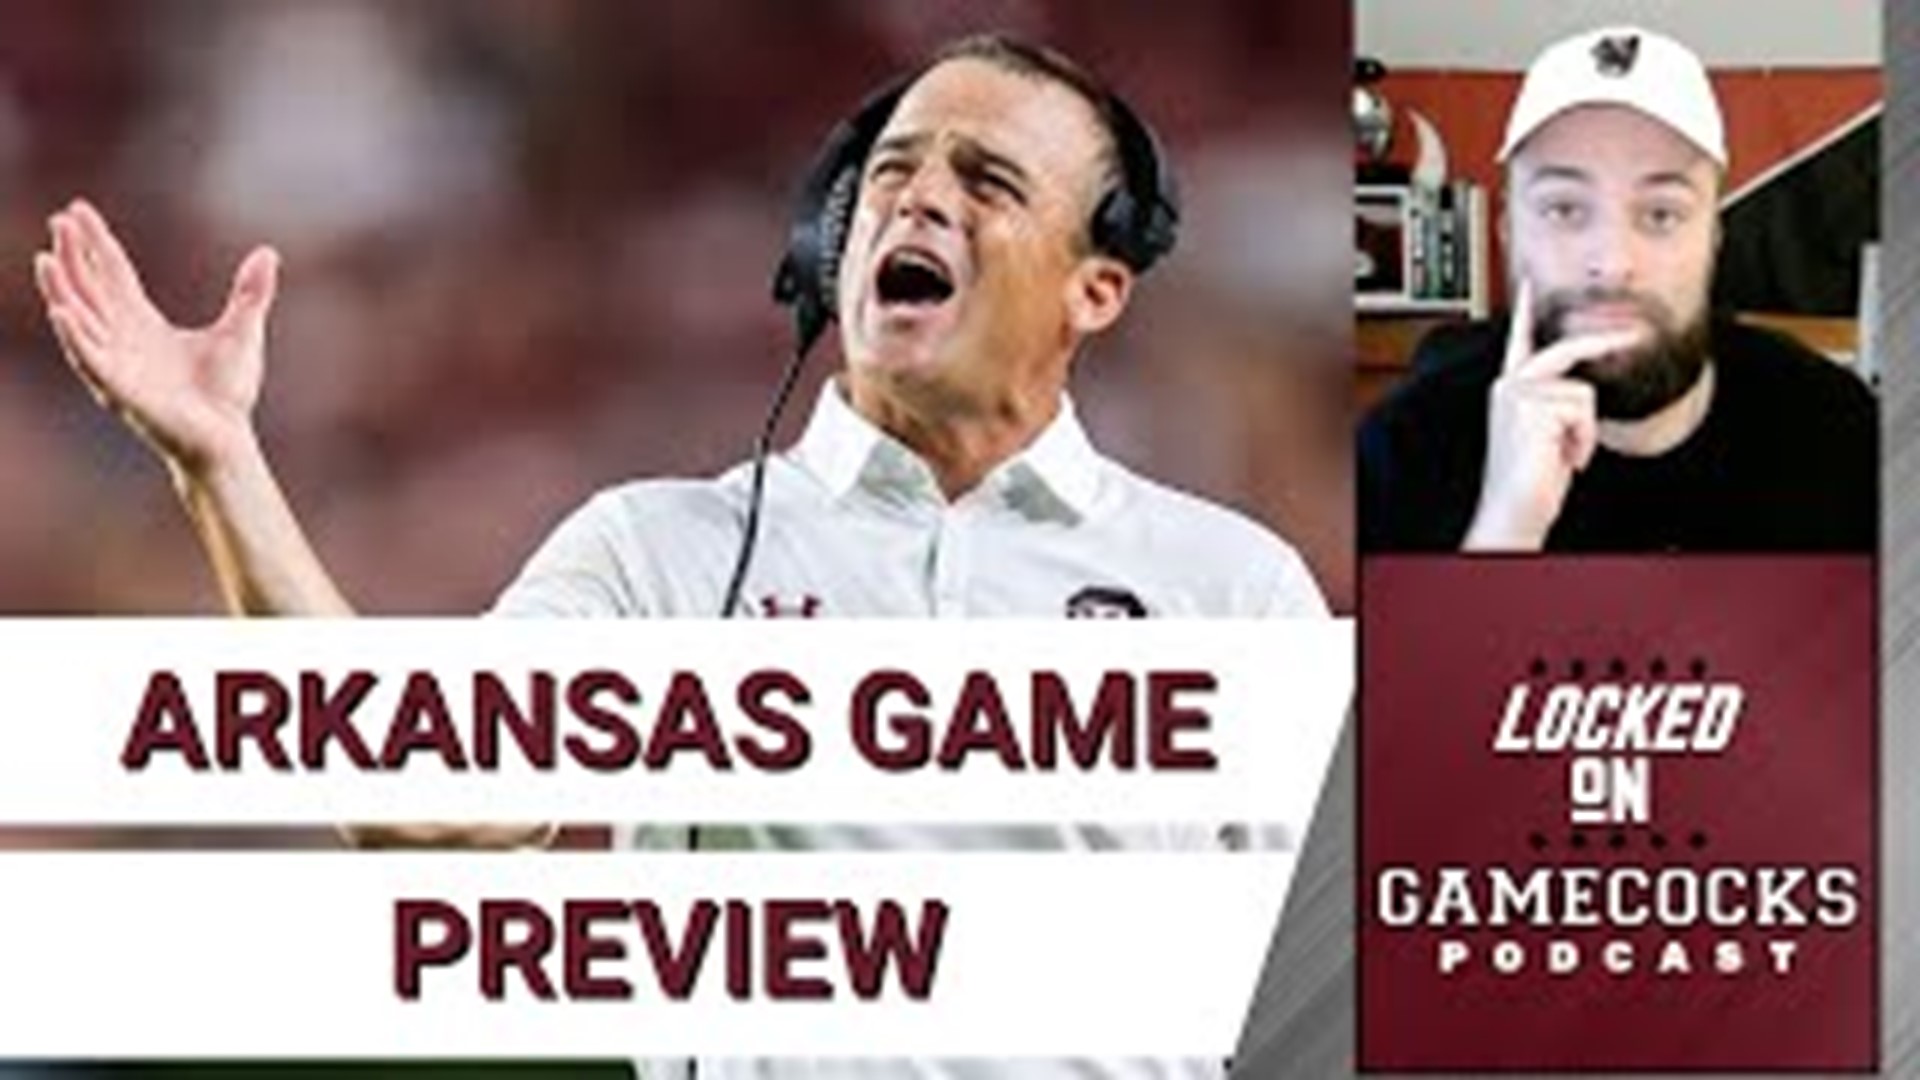 Andrew does one final deep dive into South Carolina's impending matchup against the Arkansas Razorbacks.